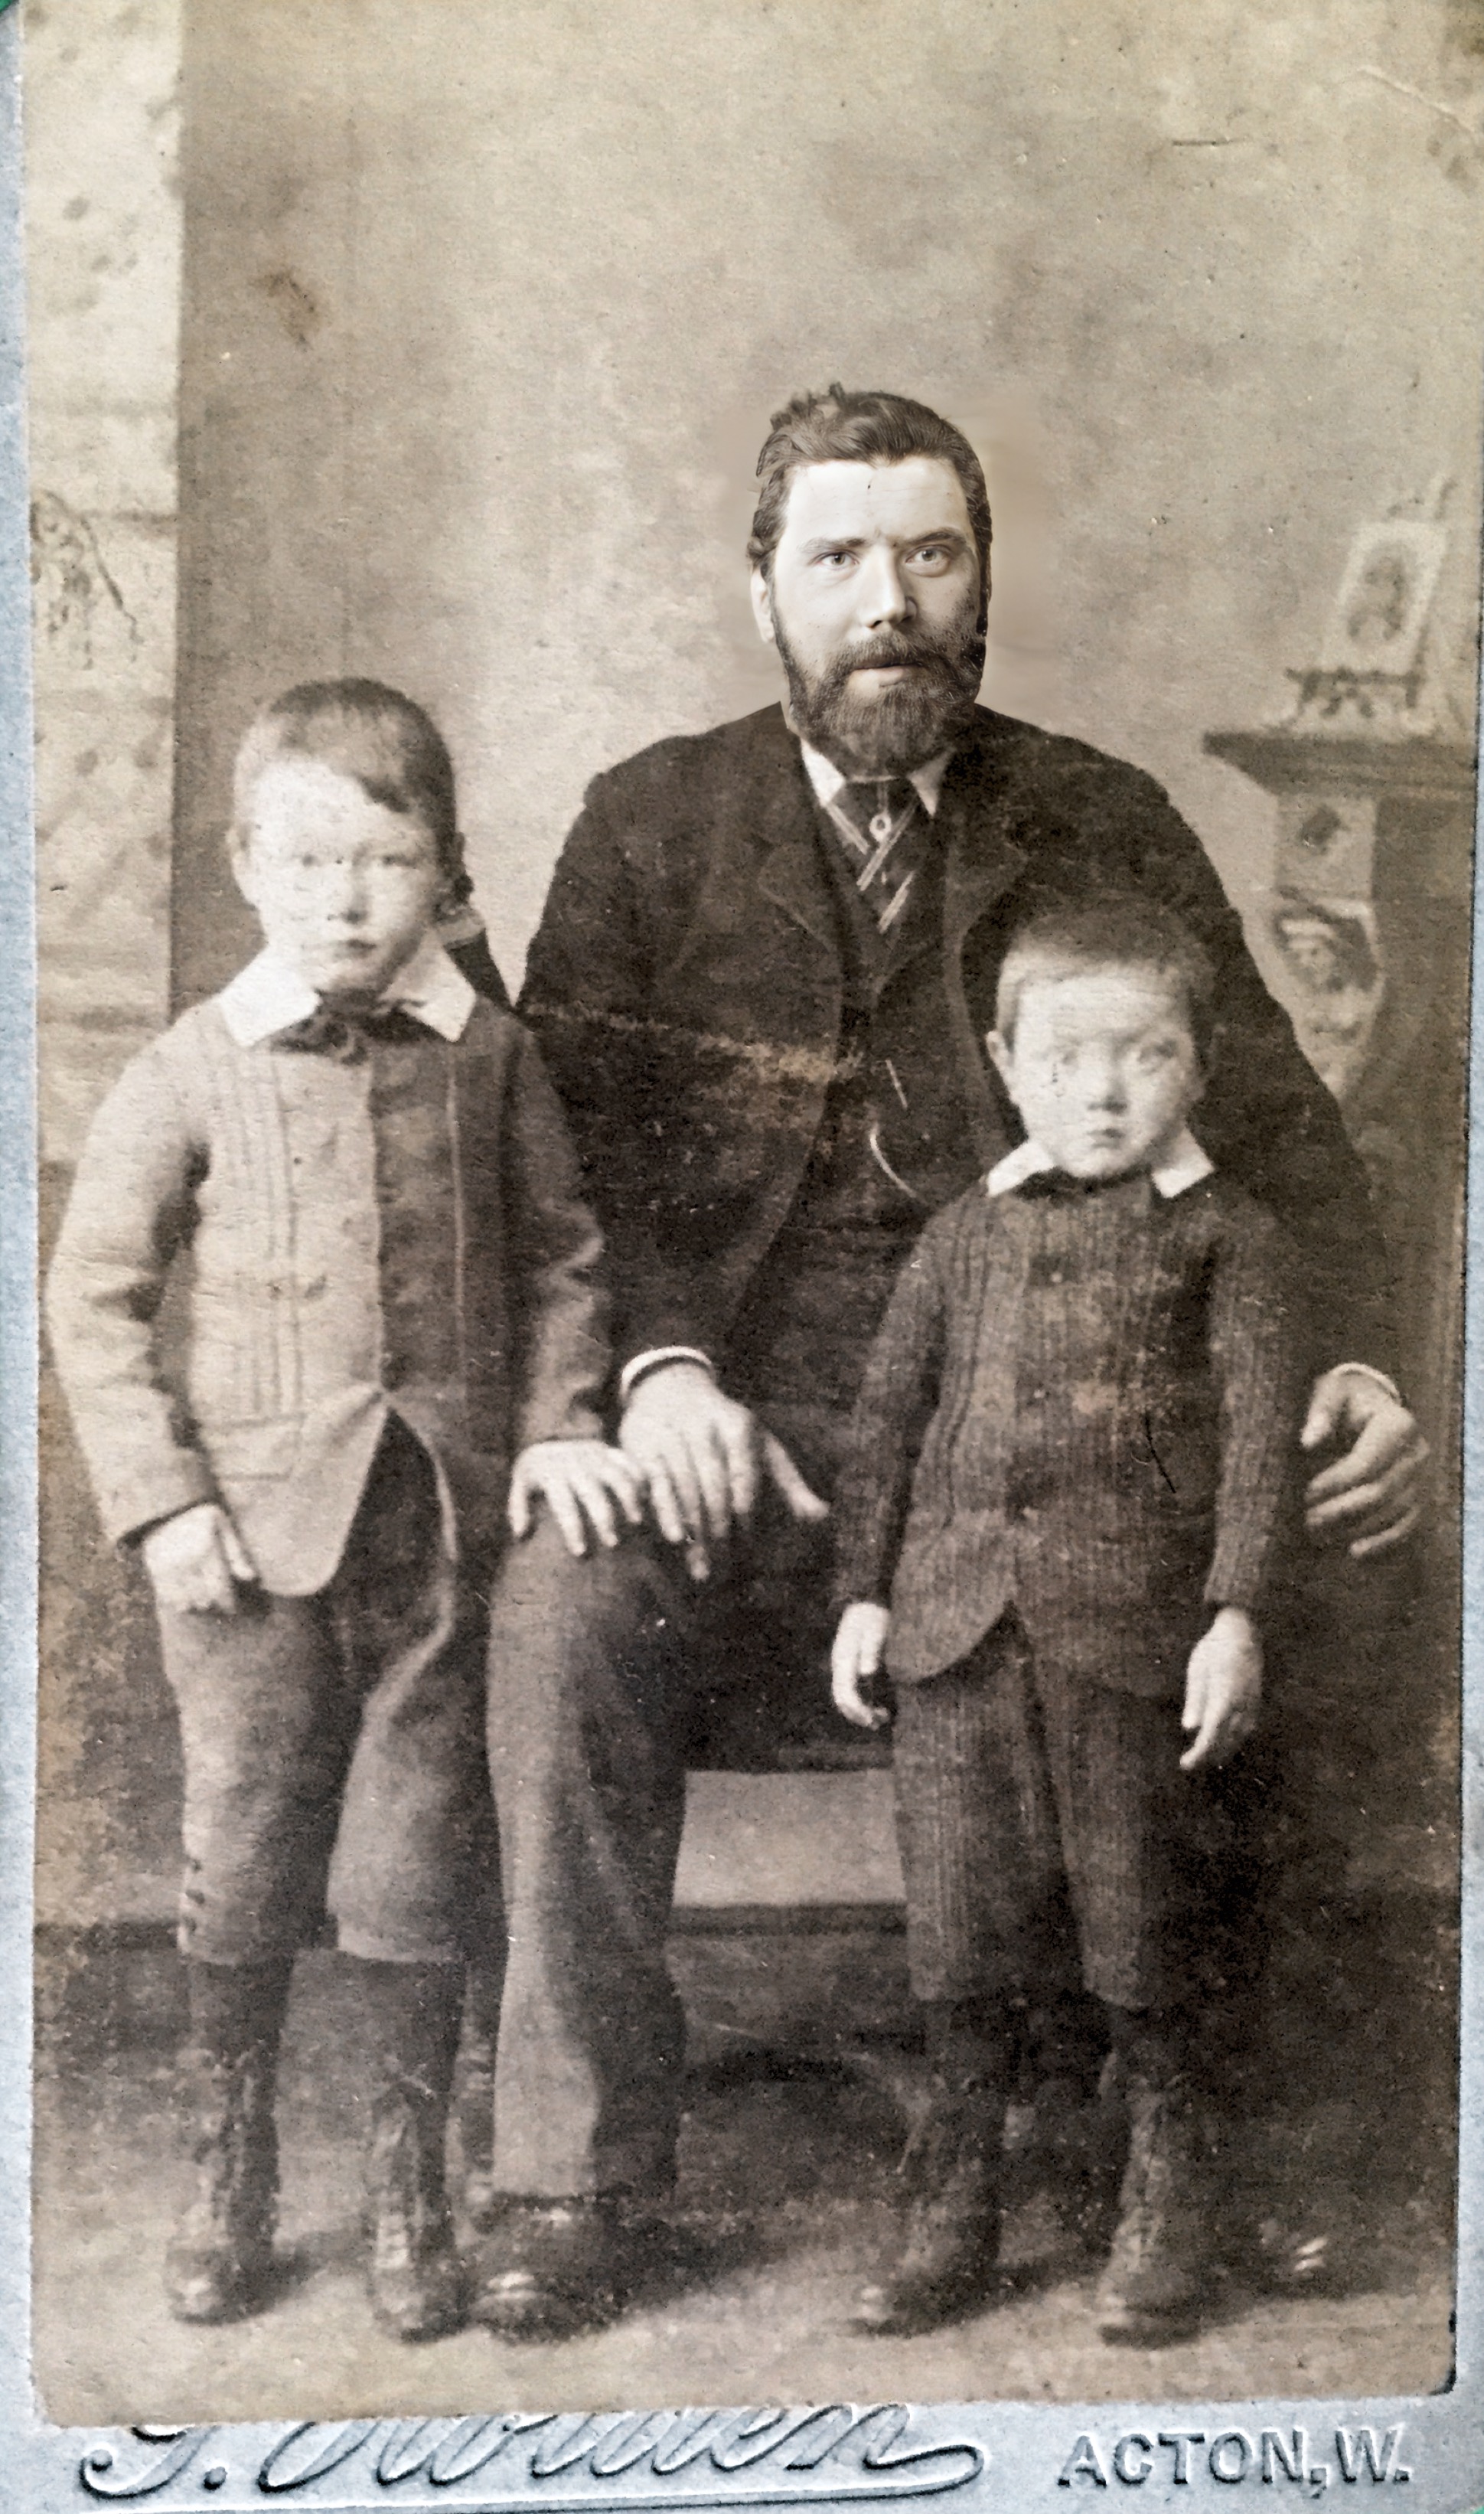 Daniel Harries with two youngest Ted and Charley (Edward b. 1899 and Charles b.1901)